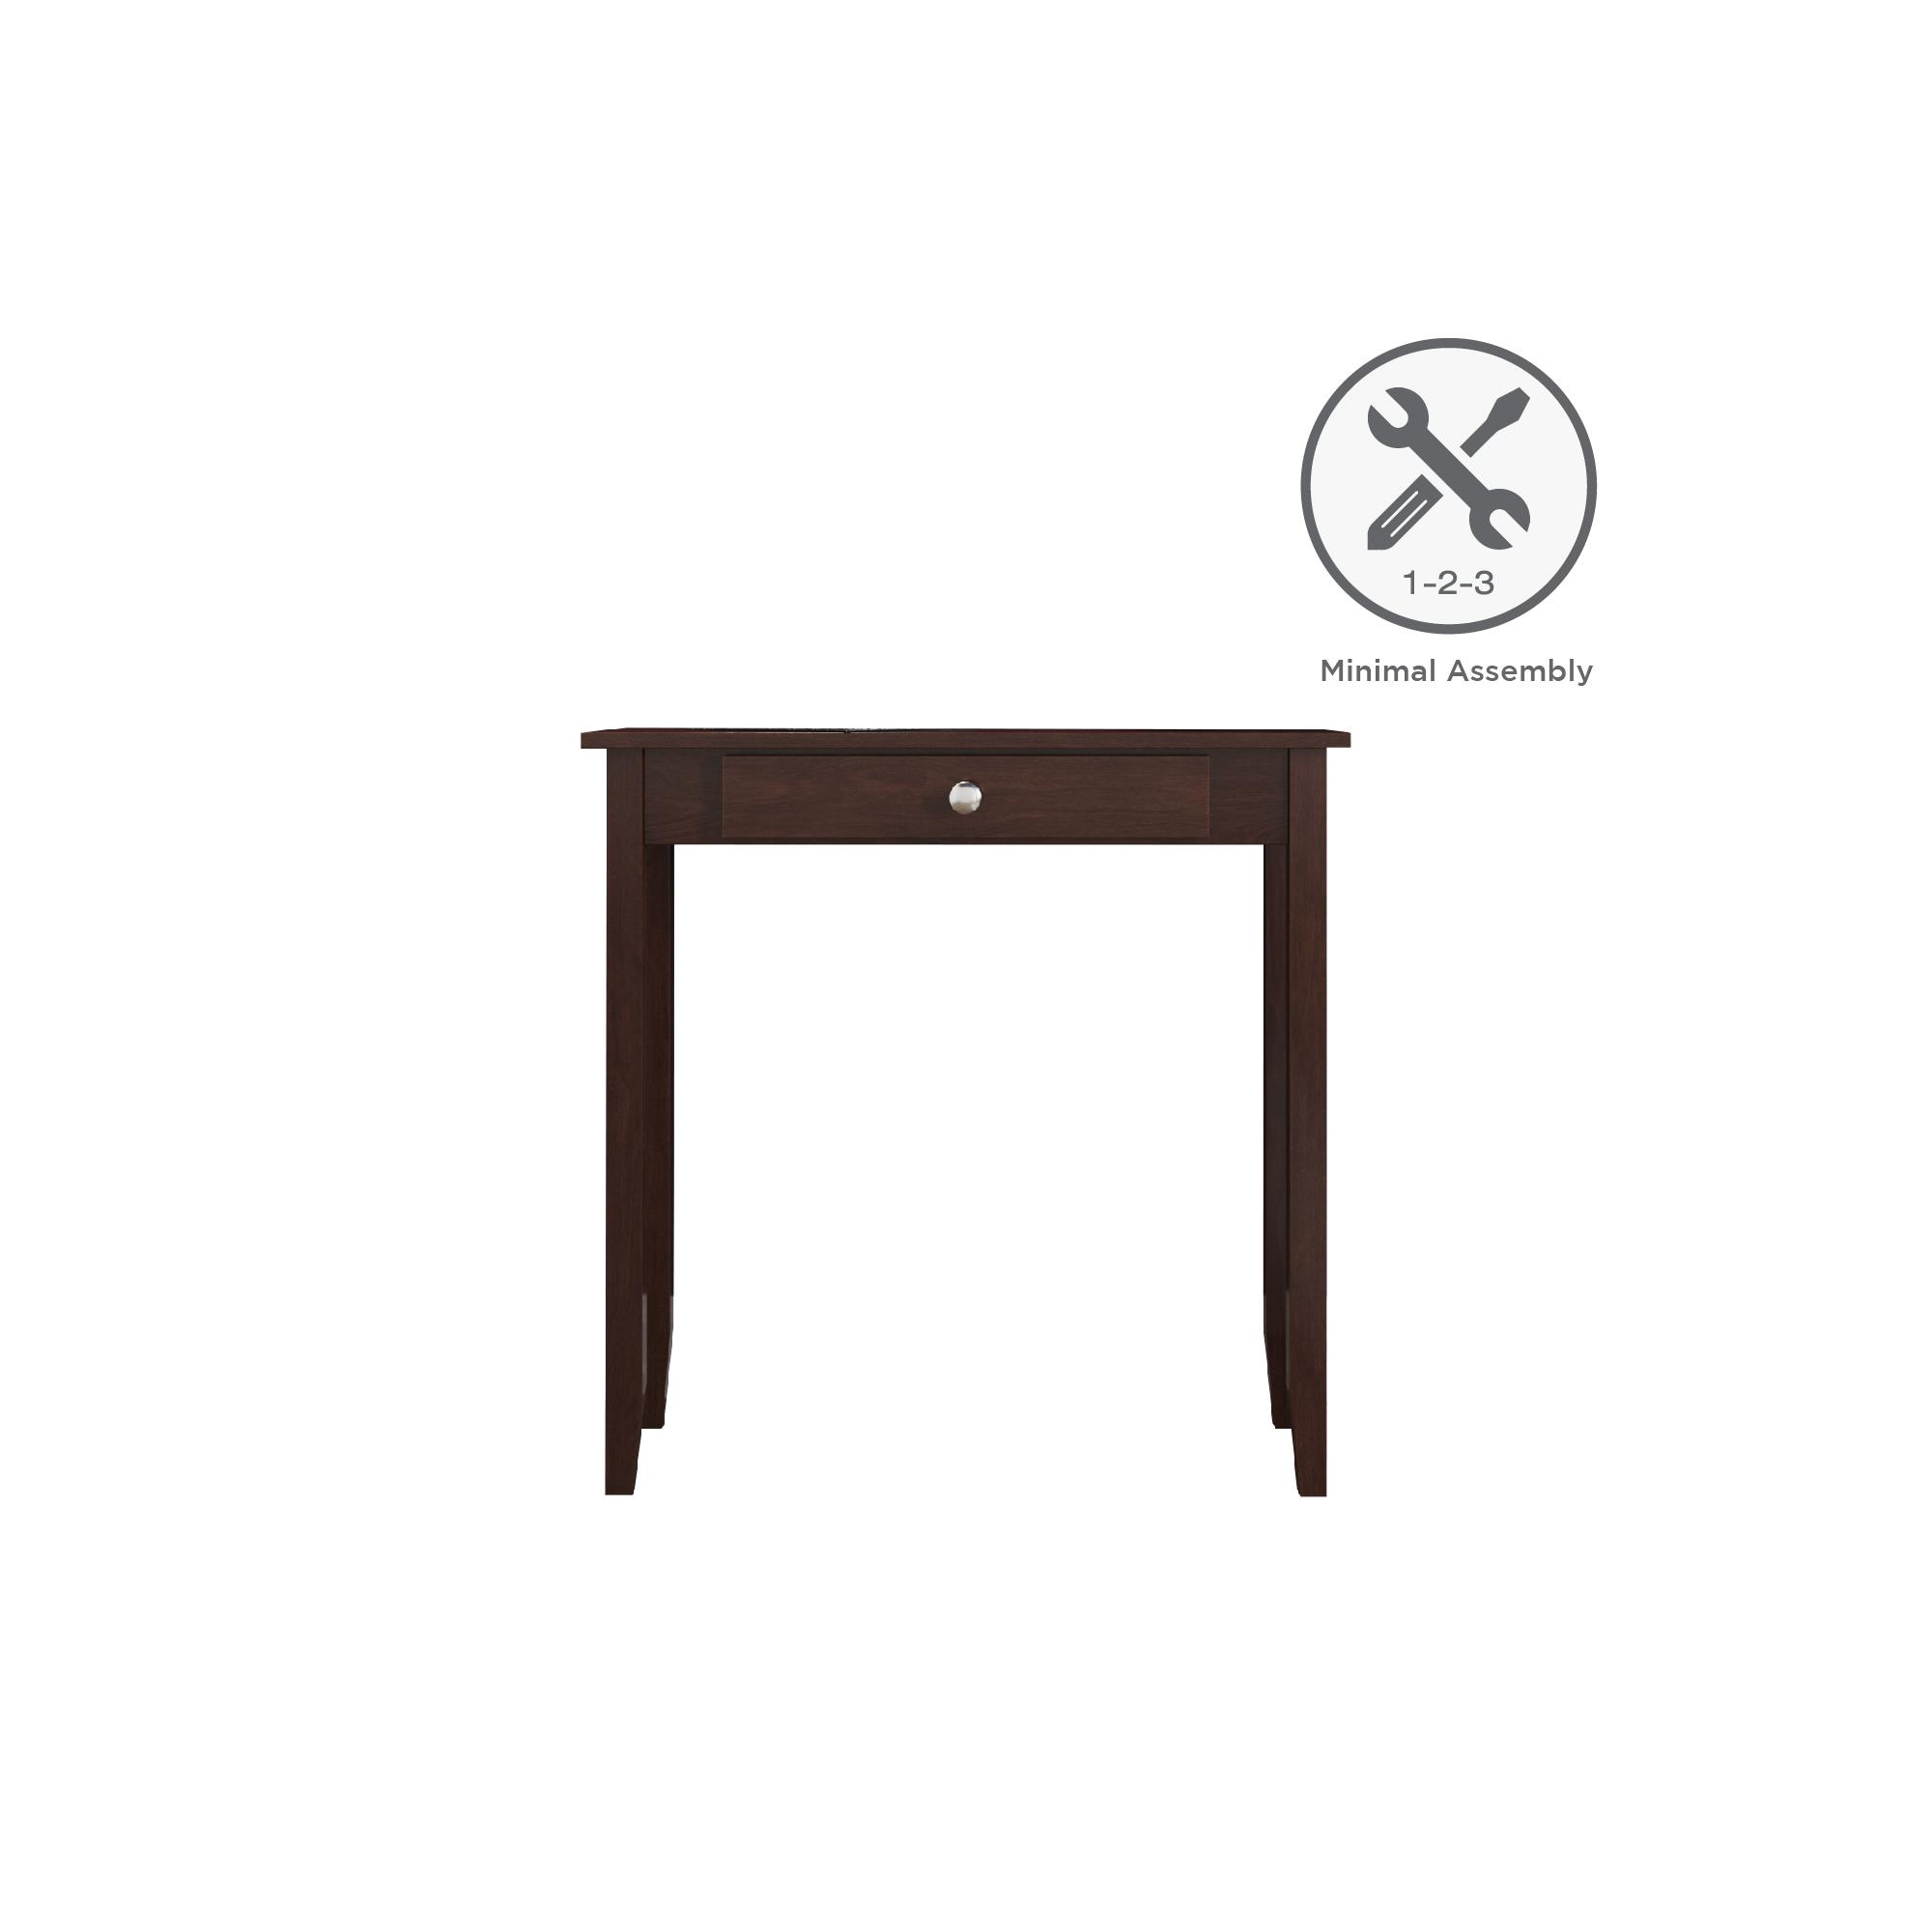 DHP Rosewood Console Table, Medium Coffee - image 2 of 8